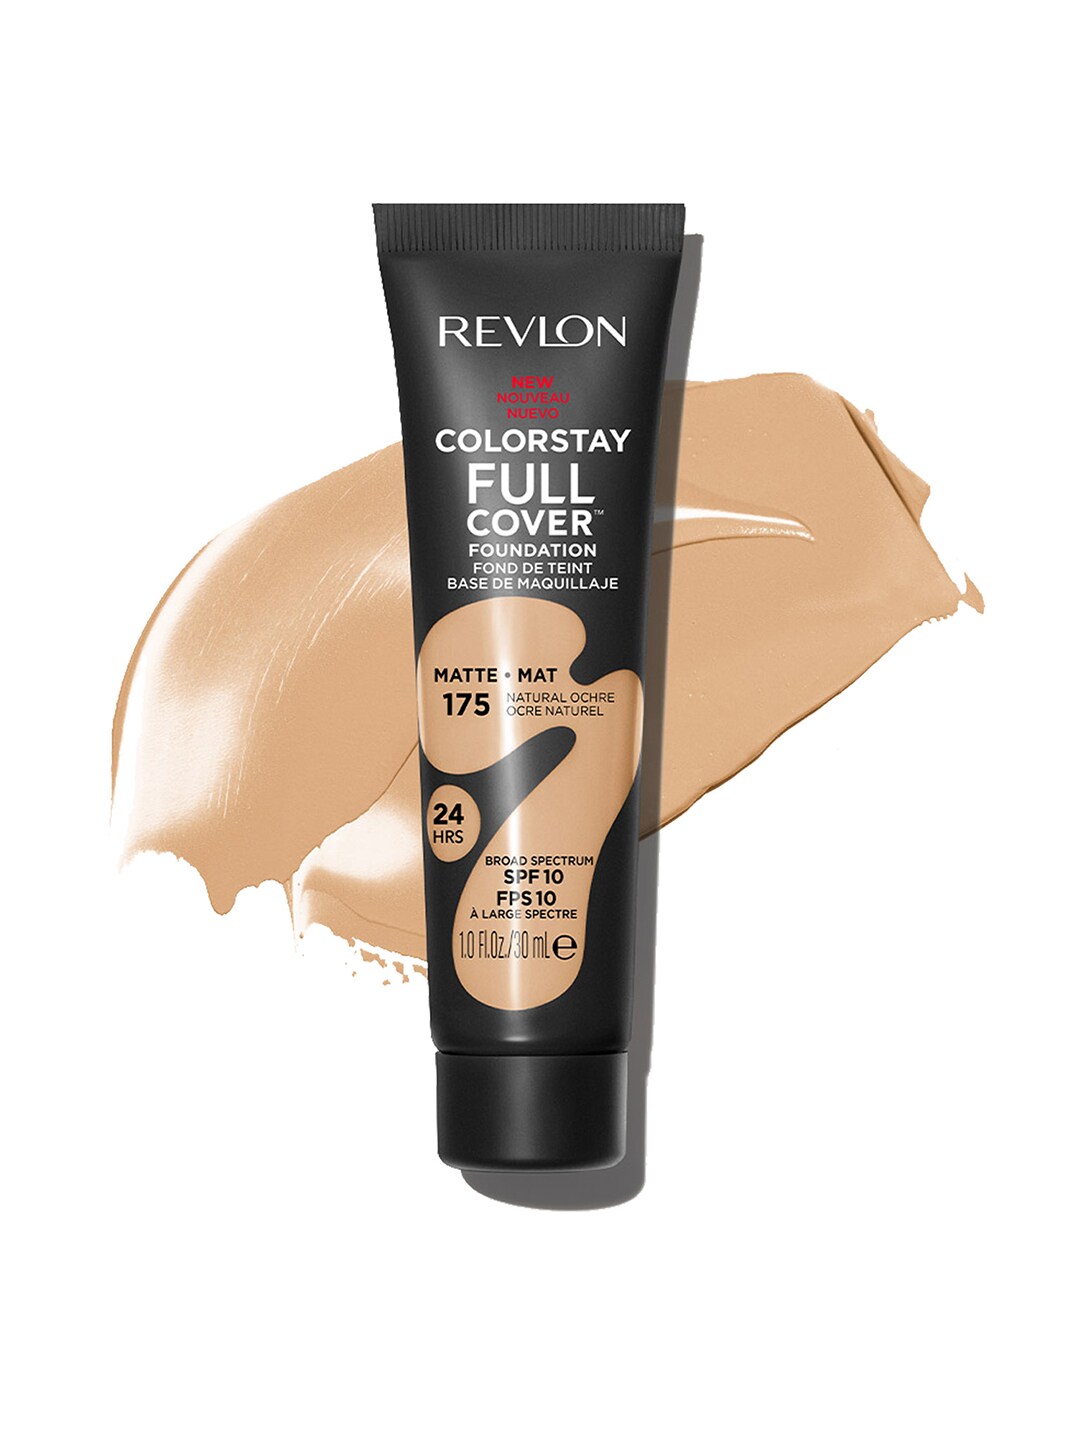 Revlon Colorstay Full Cover Foundation - Natural Ochre 175 Price in India